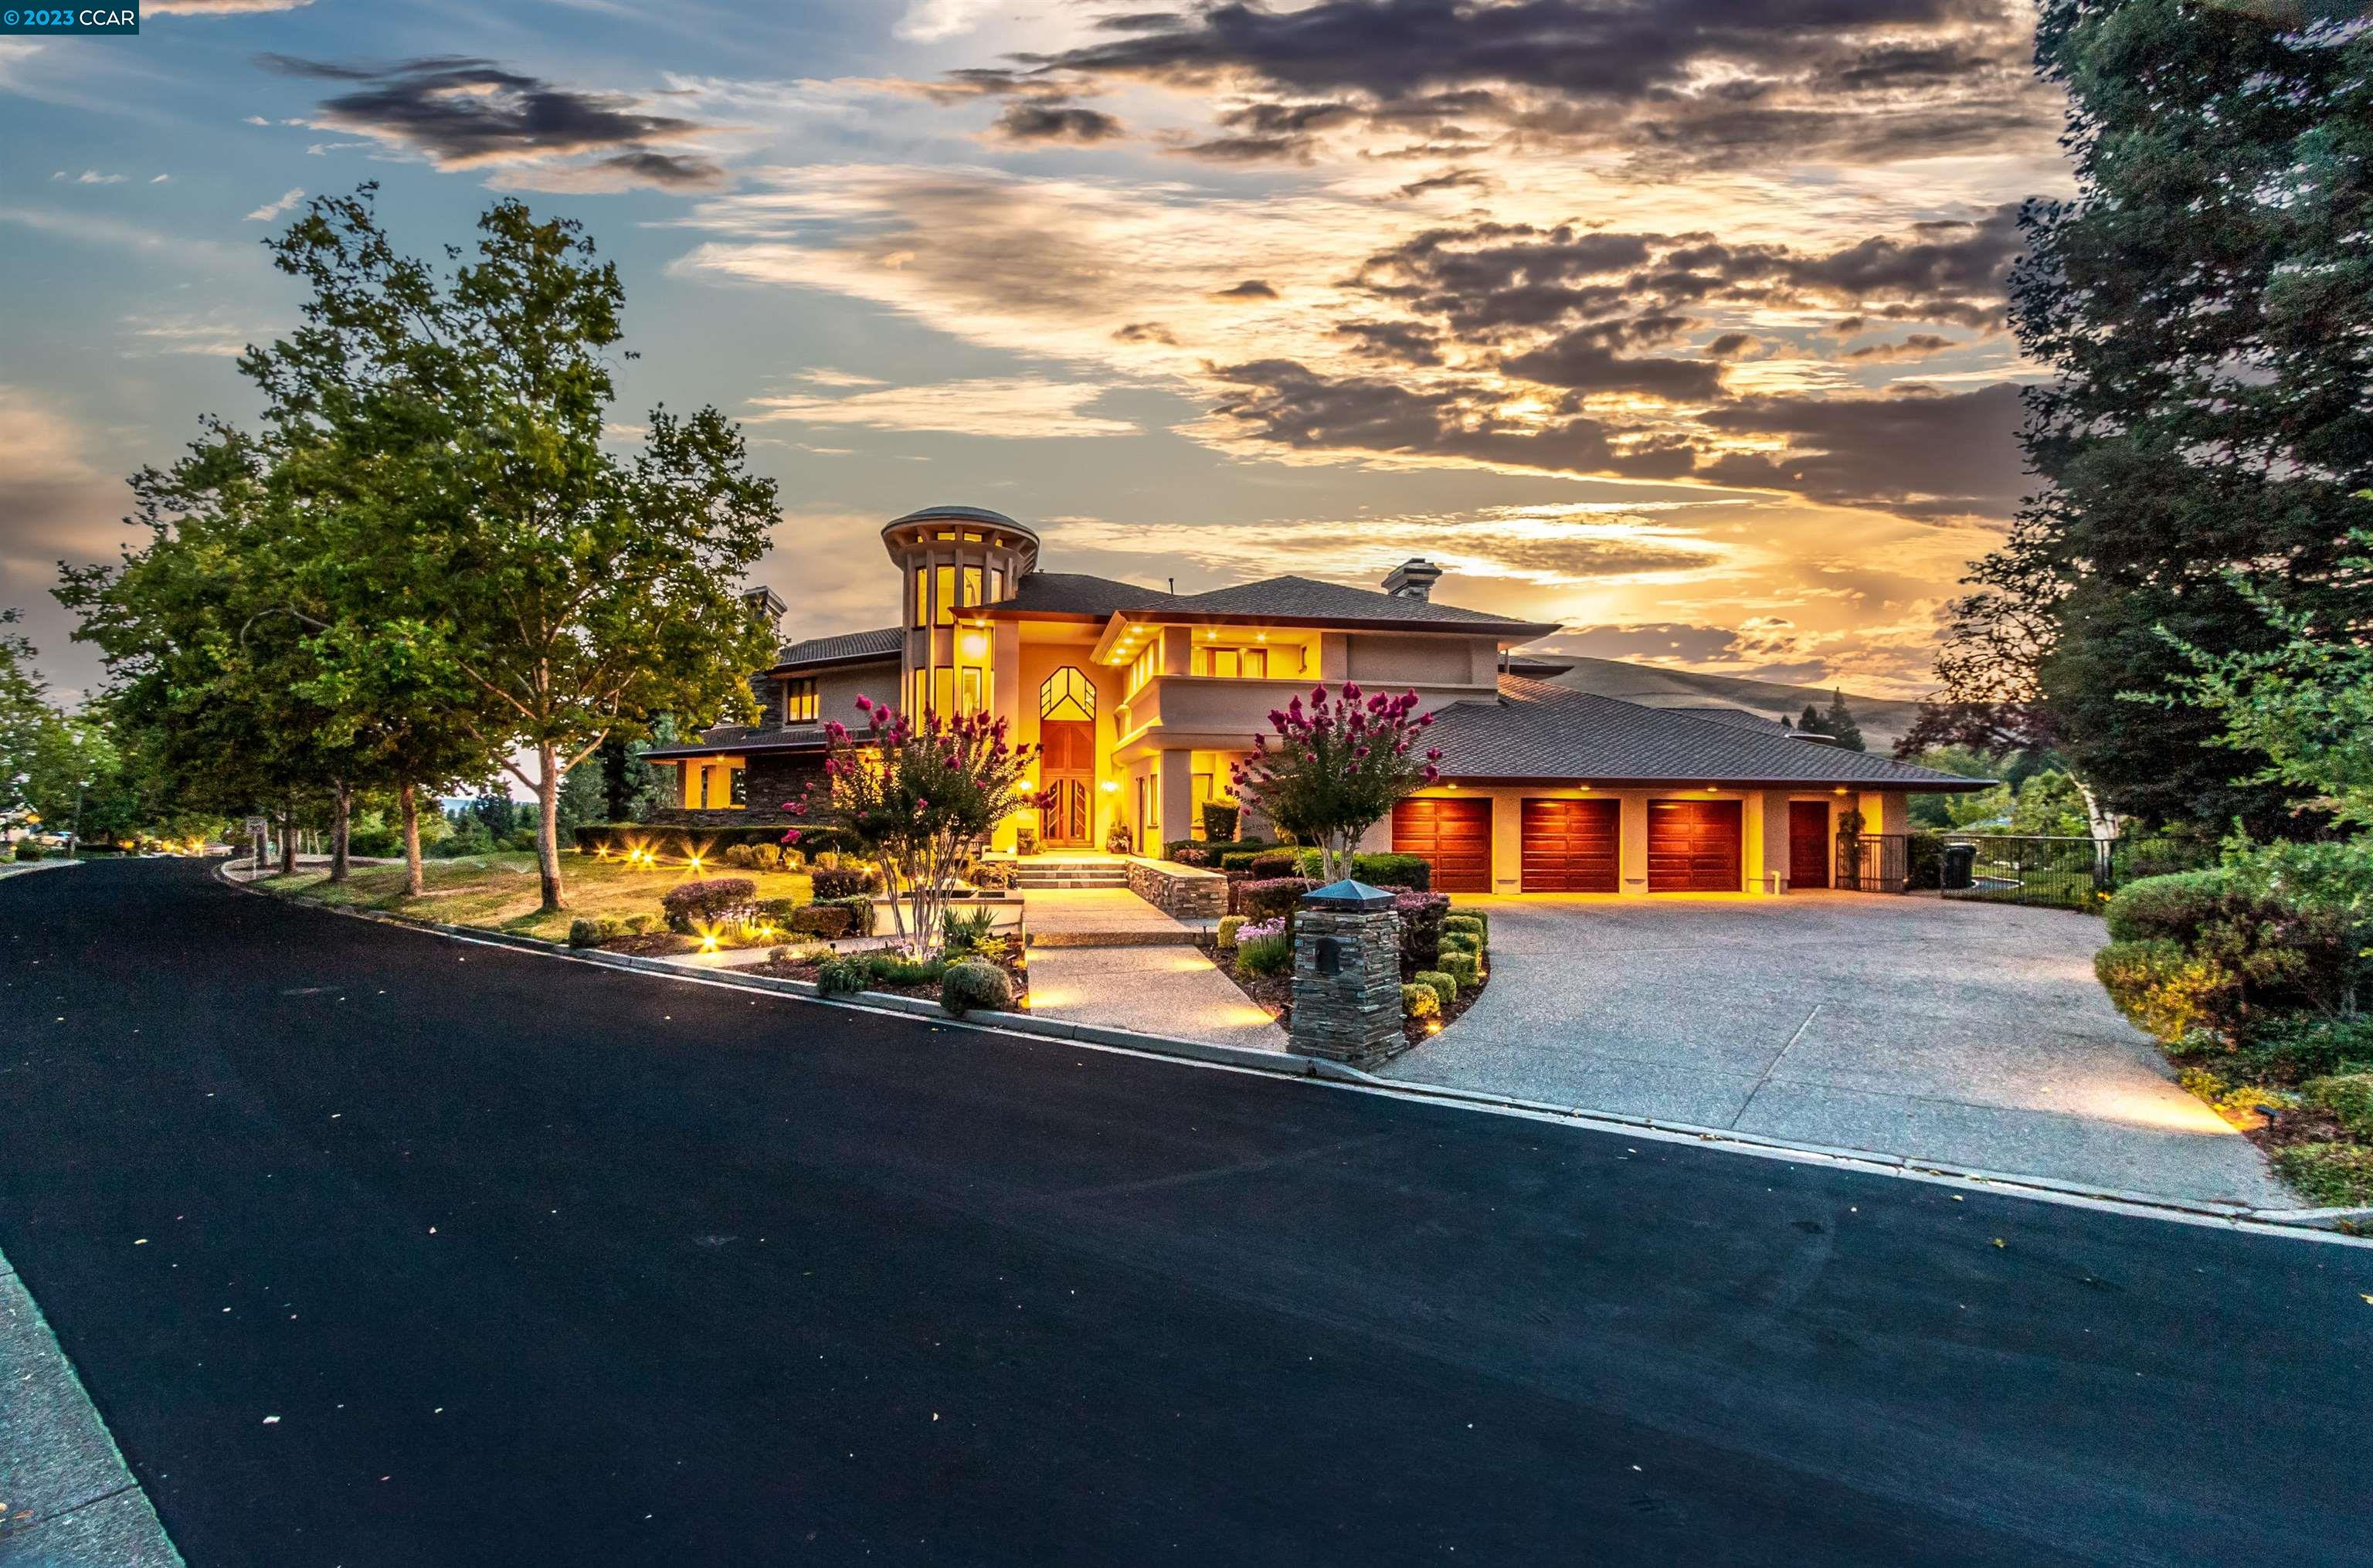 Architecturally stunning, custom-crafted Blackhawk estate. An ultra-private .41-acre sanctuary borders fairway & open space. A Jeff Behring 2-level design showcases jaw-dropping features throughout. 6,072 +/-sf. A mecca for entertaining. Unobstructed views from every window. 5 bdrms, 6 bths. Impressive slate flagstone floors. Magnificent ballroom-sized living rm w/custom built-in furniture, custom designed carpet, sunken lounge w/frpl; wrap-around view windows. Formal dining, rm, custom crafted built-ins; buffet, coffered ceiling. Gourmet kitchen w/white Corian counters, SubZero, Dacor, KitchenAid & Bosch appls. Stacked-stone frpl surround soars to top of dramatic 20-ft + barrel ceiling w/custom lit soffits in family rm. 1,000-bottle wine cellar behind double mahogany drs. Walk-around bar. Custom mahogany cabinetry. Main-level guest rm. 2 staircases. Primary suite, high ceiling, frpl, pvt balcony, 2 walk-in closets, en suite w/some marble finishes. Covered & open slate flagstone patios, pool, spa, garden bds. 3-car + golf-cart garage. 2 whole-house fans. Zoned lighting, Ecobus thermostats. Gated Country Club. 2 golf courses, clubhouses, tennis cts, sports complex, fitness ctr. Near top-rated SRVUSD schls, Mt. Diablo, Blackhawk Plza, downtown Danville, Livermore